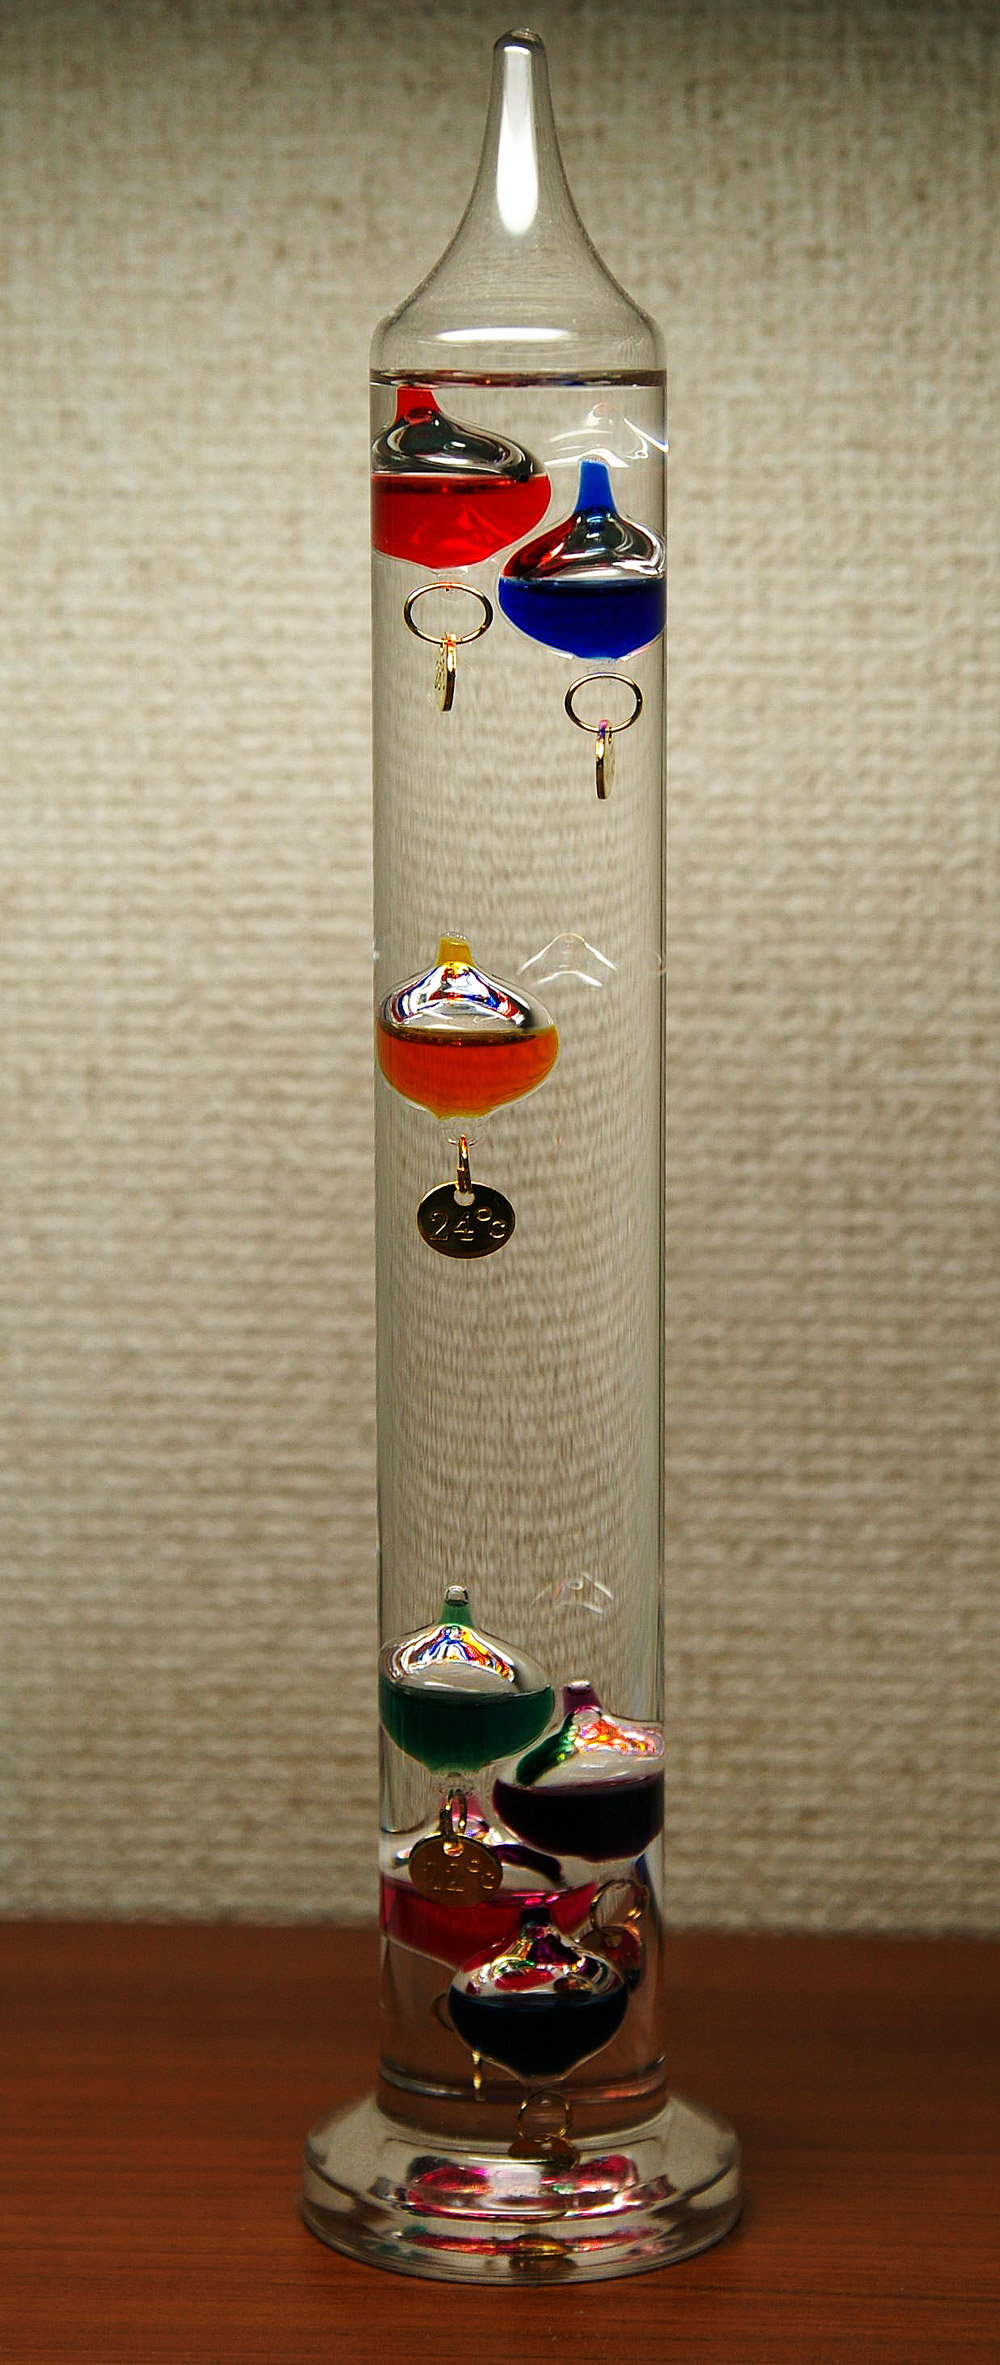 Eher schön, als nützlich: das Galileo-Thermometer. <span class="img-copyright">© Hustvedt /<a href="http://creativecommons.org/licenses/by/3.0">CC-by-sa 3.0</a></span>